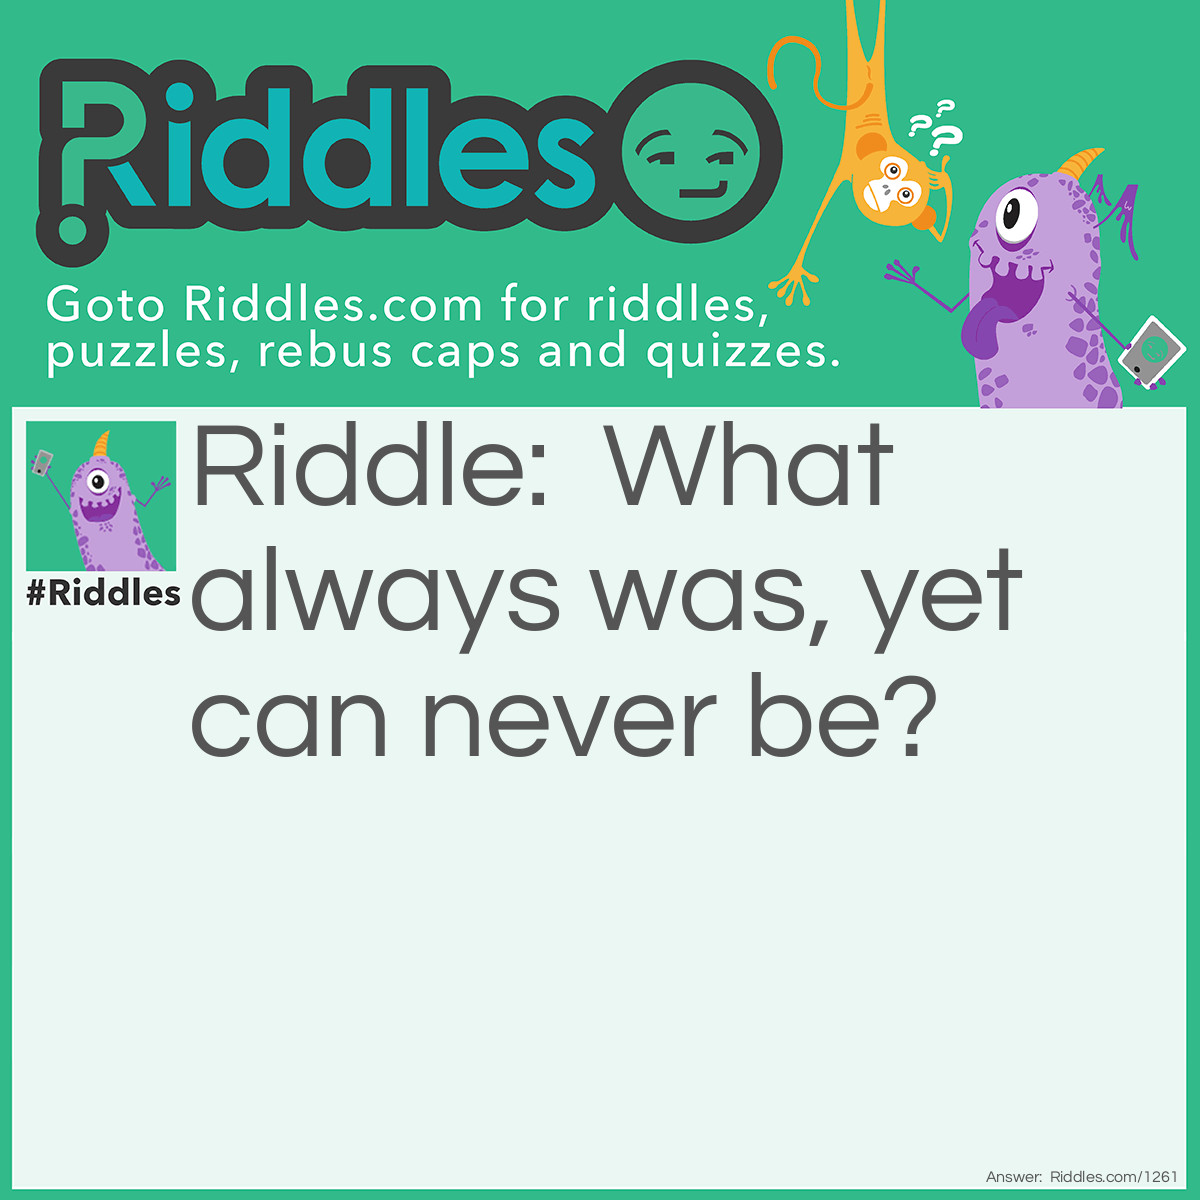 Riddle: What always was, yet I can never be? Answer: Yesterday.